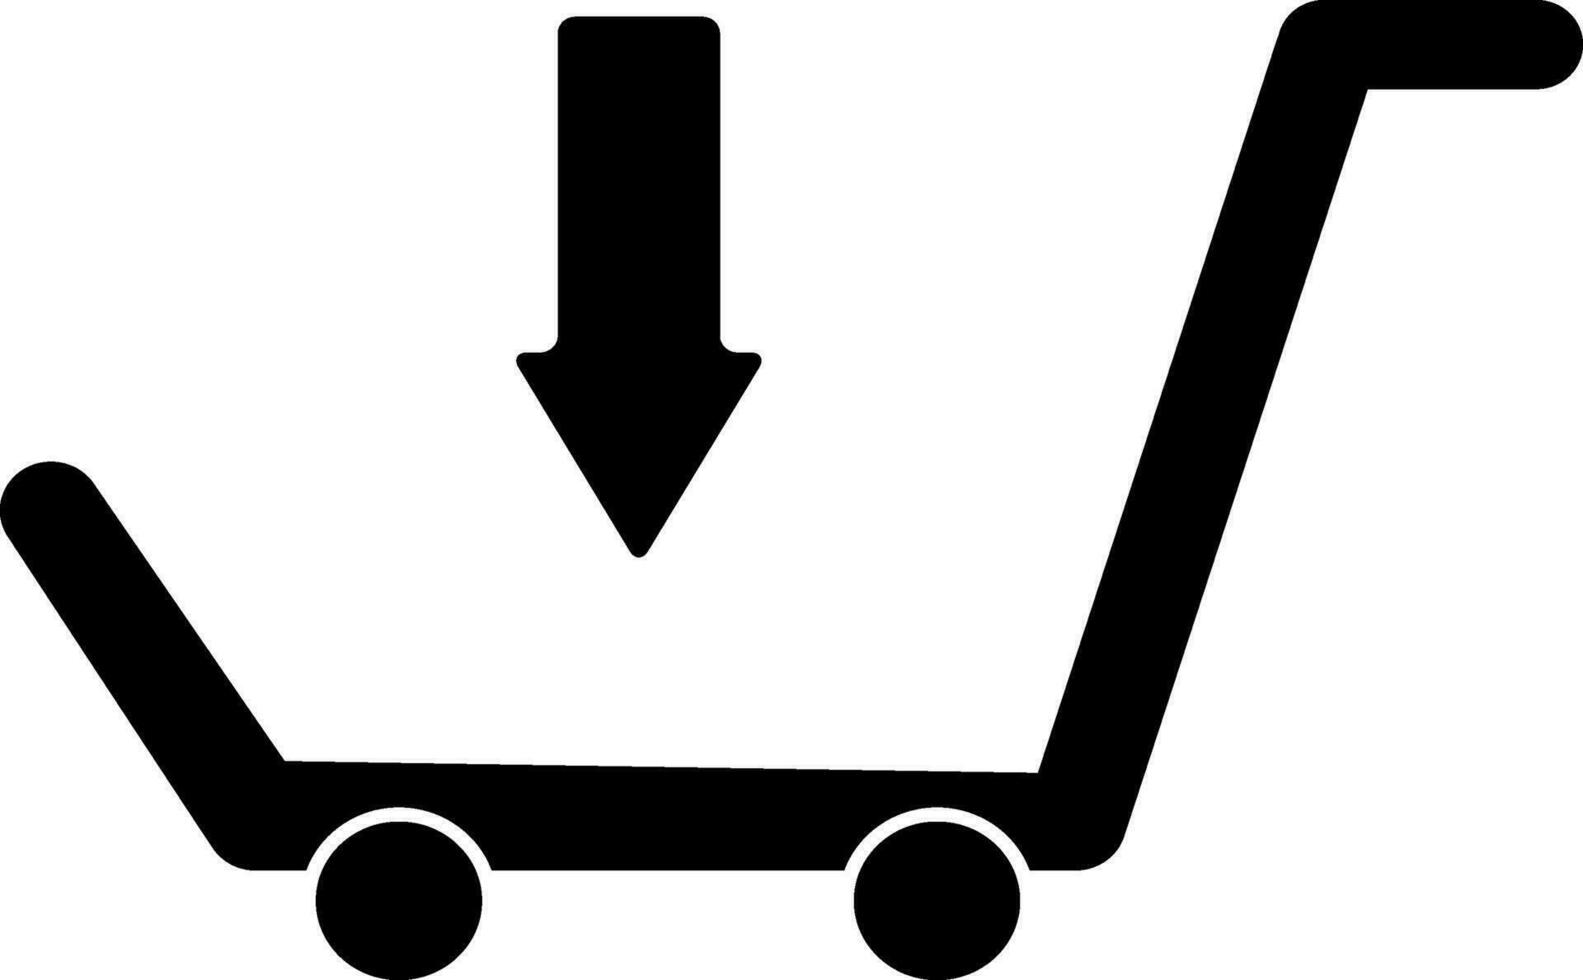 Shopping cart icon with downward arrow. vector